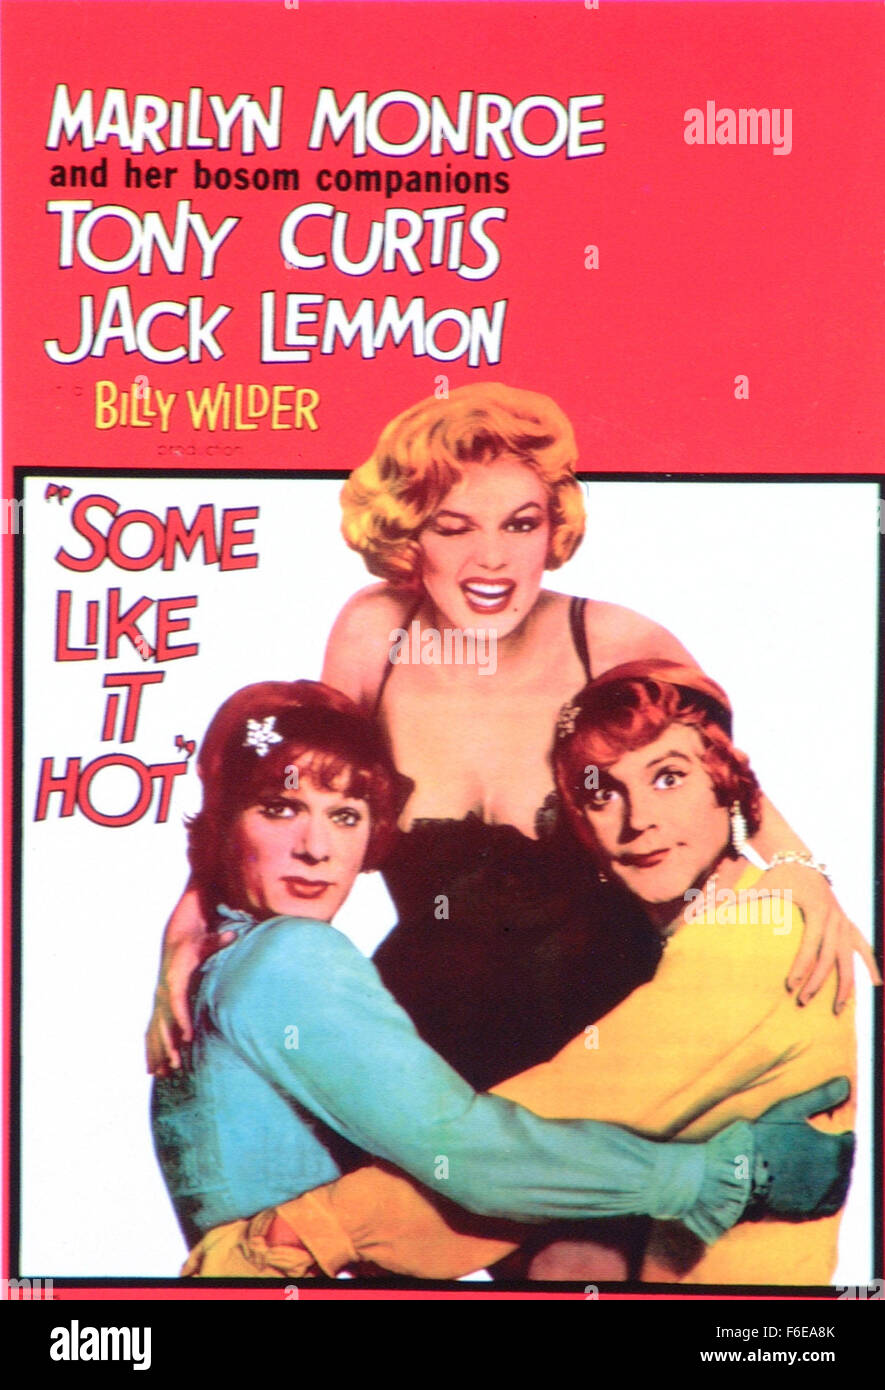 Film Title:  SOME LIKE IT HOT.  DIRECTOR:  BILLY WILDER.  STUDIO:  United Artists.  PLOT:  Two unemployed, 20's era Chicago jazz musicians, Joe (Tony Curtis) and Jerry (Jack Lemmon) accidentally witness the St. Valentine's Day Massacre, and must flee from gangsters.  They masquerade as women, and join Sweet Sue's all-girl jazz band which is travelling that night to a gig in  Florida.   The cross-dressing duo's lives are further complicated when Joe falls for voluptuous singer 'Sugar Kane' Kowalczyk (Marilyn Monroe),   but can't reveal his true identity, and Jerry, as 'Daphne,' attracts a rich Stock Photo